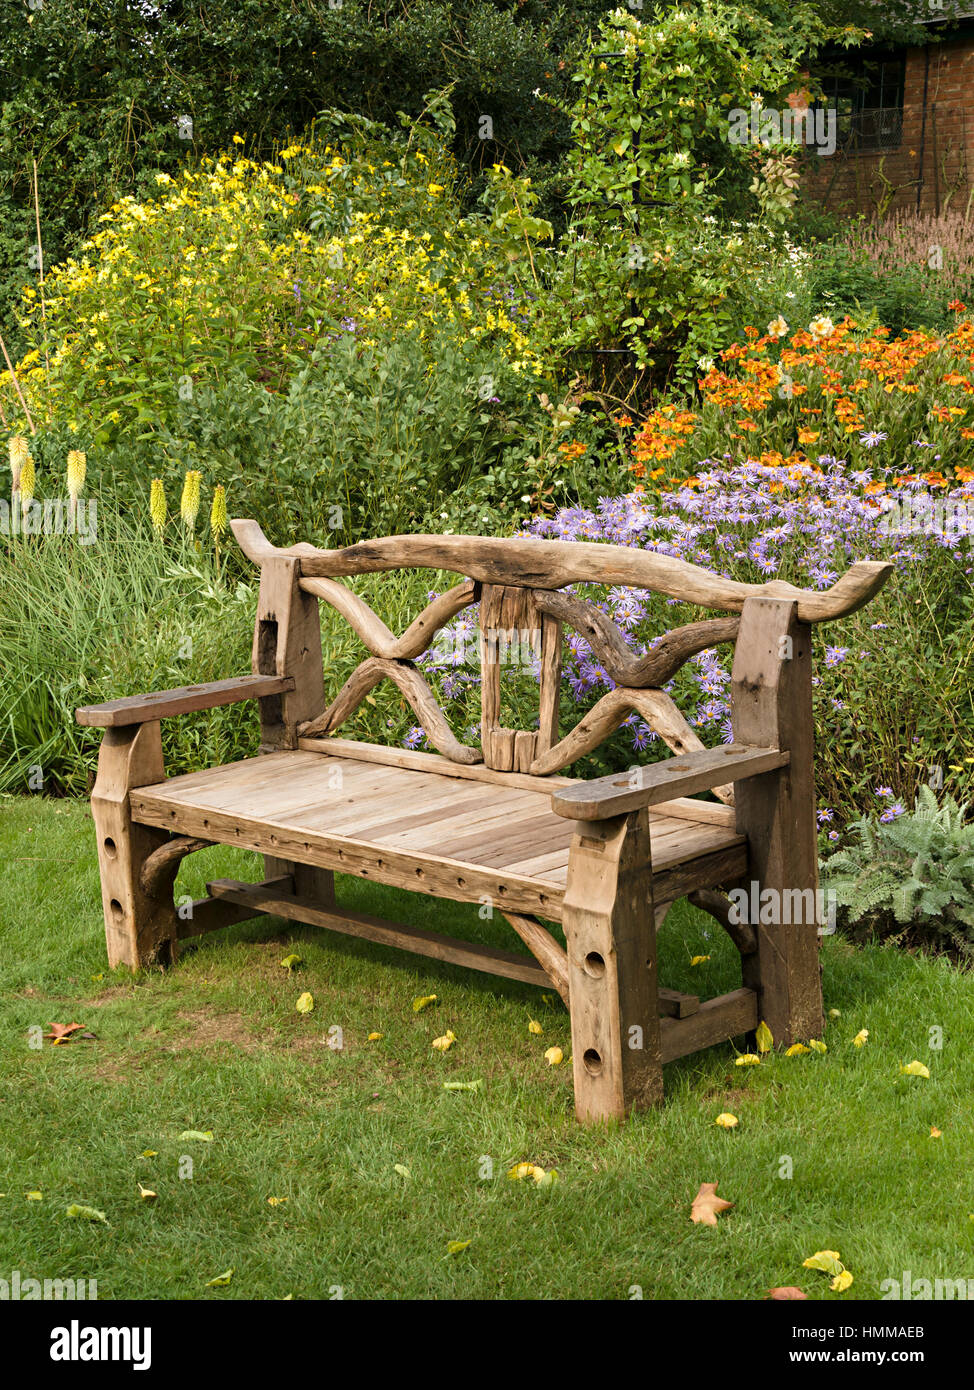 Ornate, rustic, wooden garden bench seat made from 